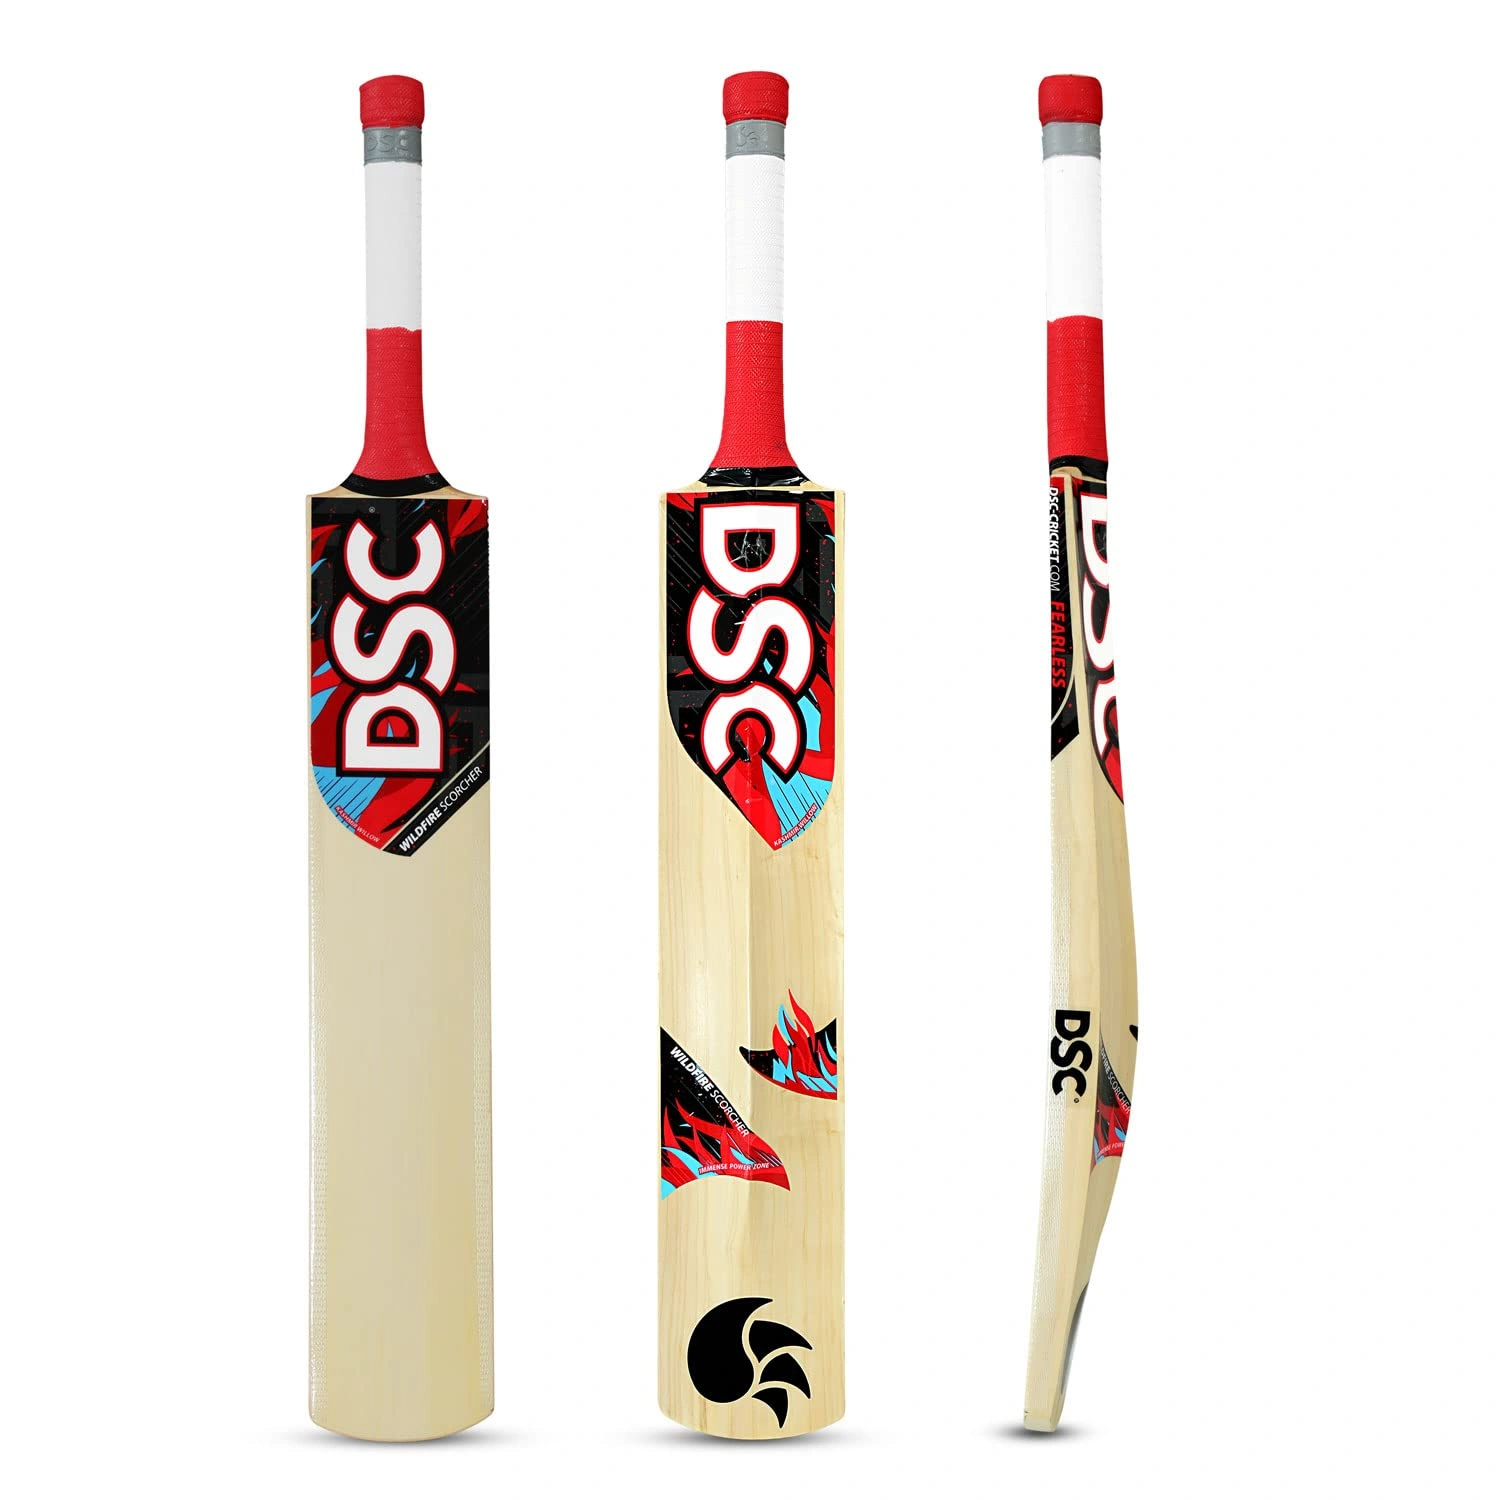 DSC Wildfire Scorcher Kashmir Willow Cricket Bat for Tennis Ball Cricket: Low Sweet Spot and Spine Profile for Powerful Shots-FS-4